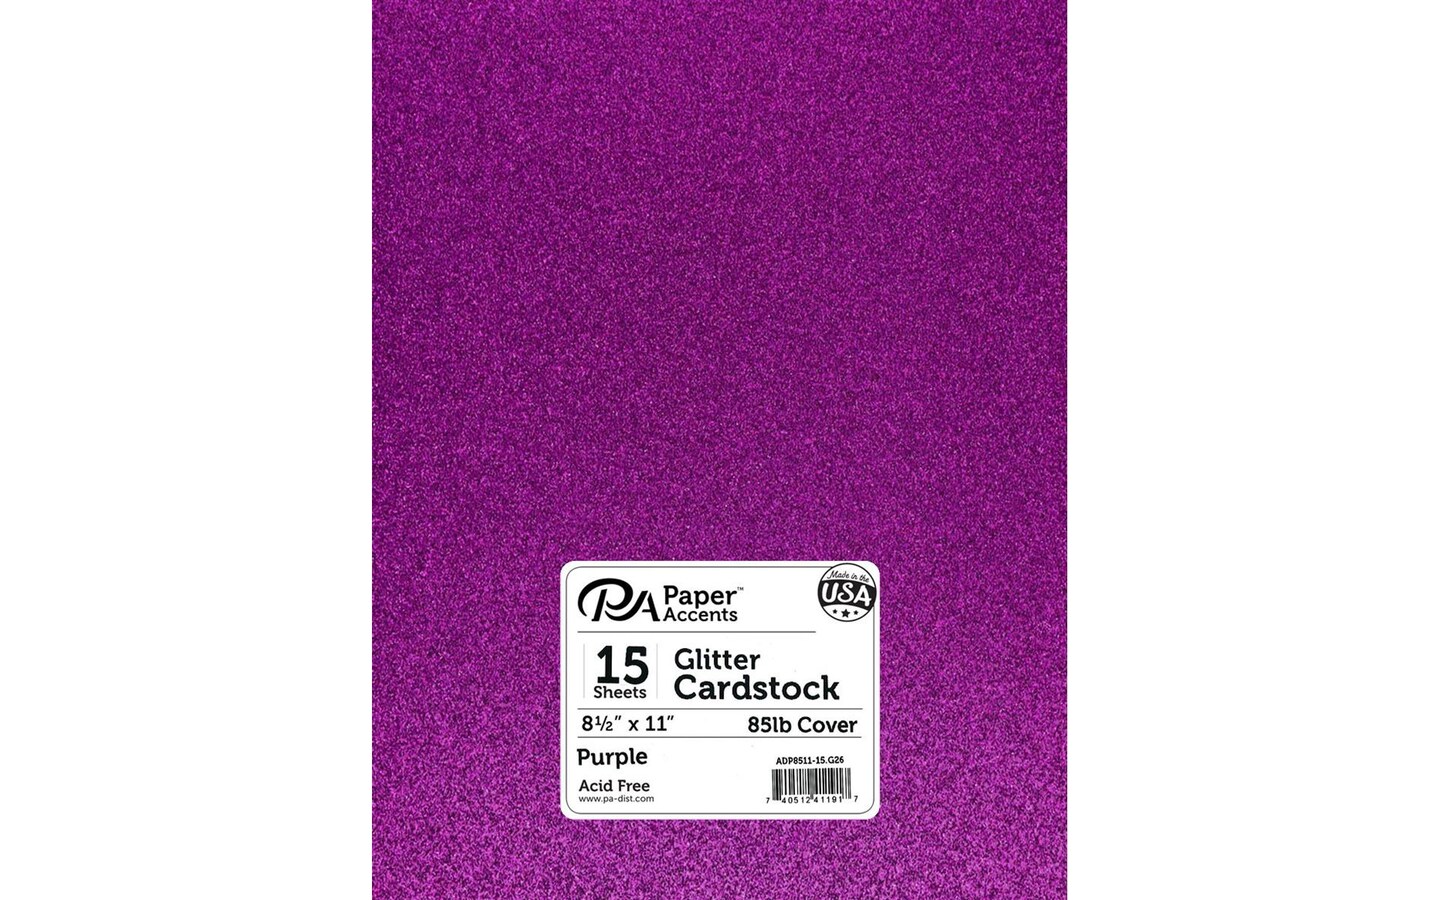 PA Paper Accents Glitter Cardstock 8.5&#x22; x 11&#x22; Purple, 85lb colored cardstock paper for card making, scrapbooking, printing, quilling and crafts, 15 piece pack